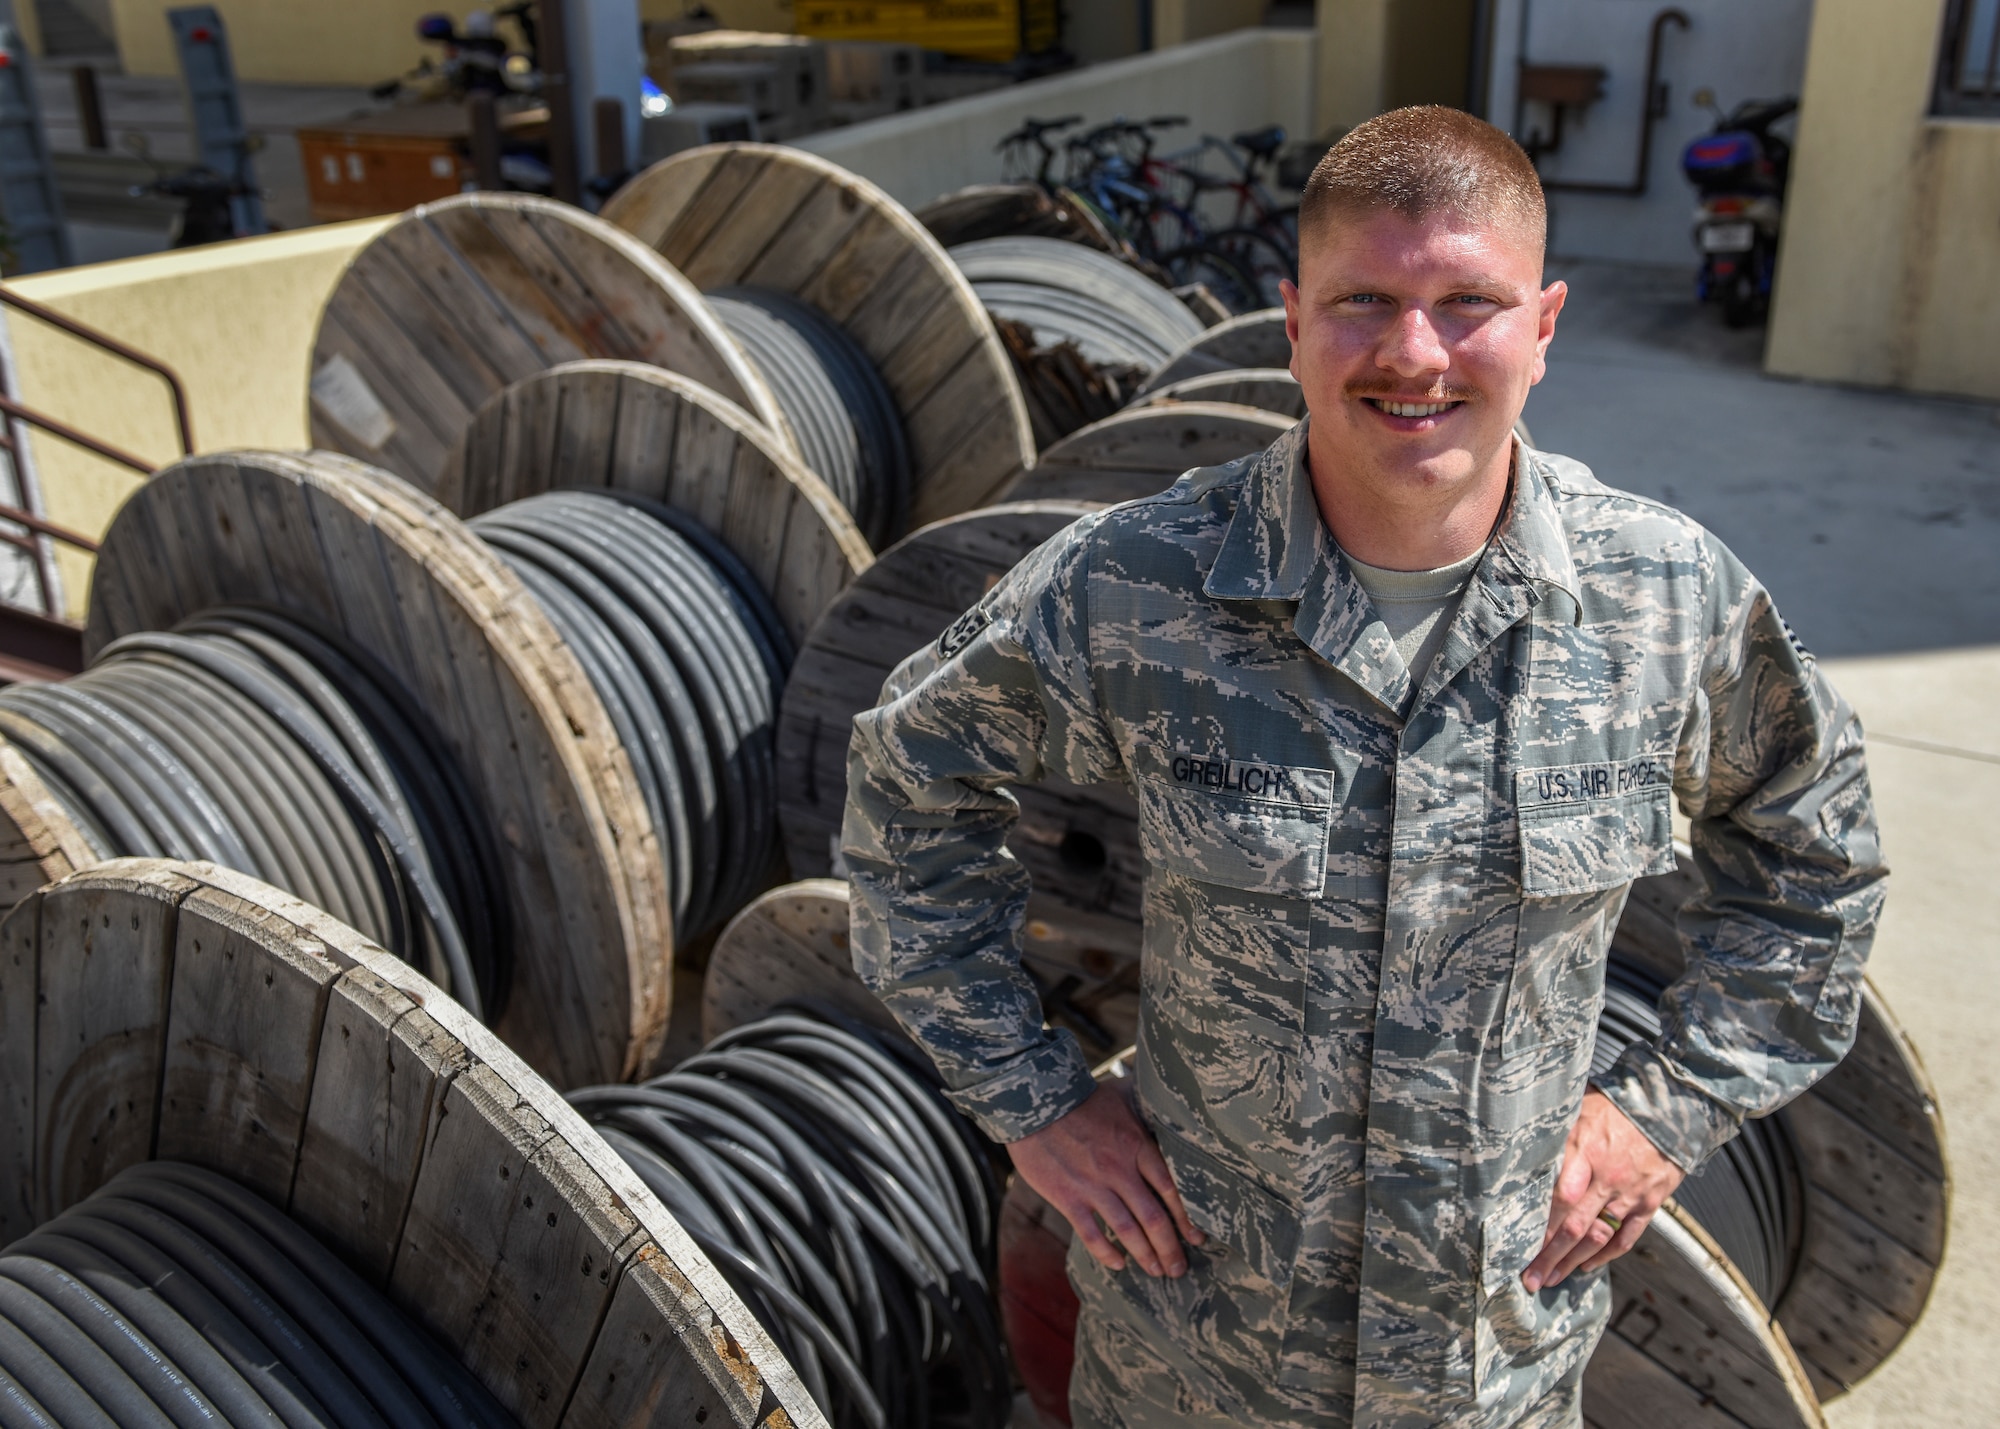 U.S. Air Force Staff Sgt. Brian Greilich, 39th Communications Squadron cable and antenna systems technician, stands in front of cables at Incirlik Air Base, Turkey, July 6, 2018.